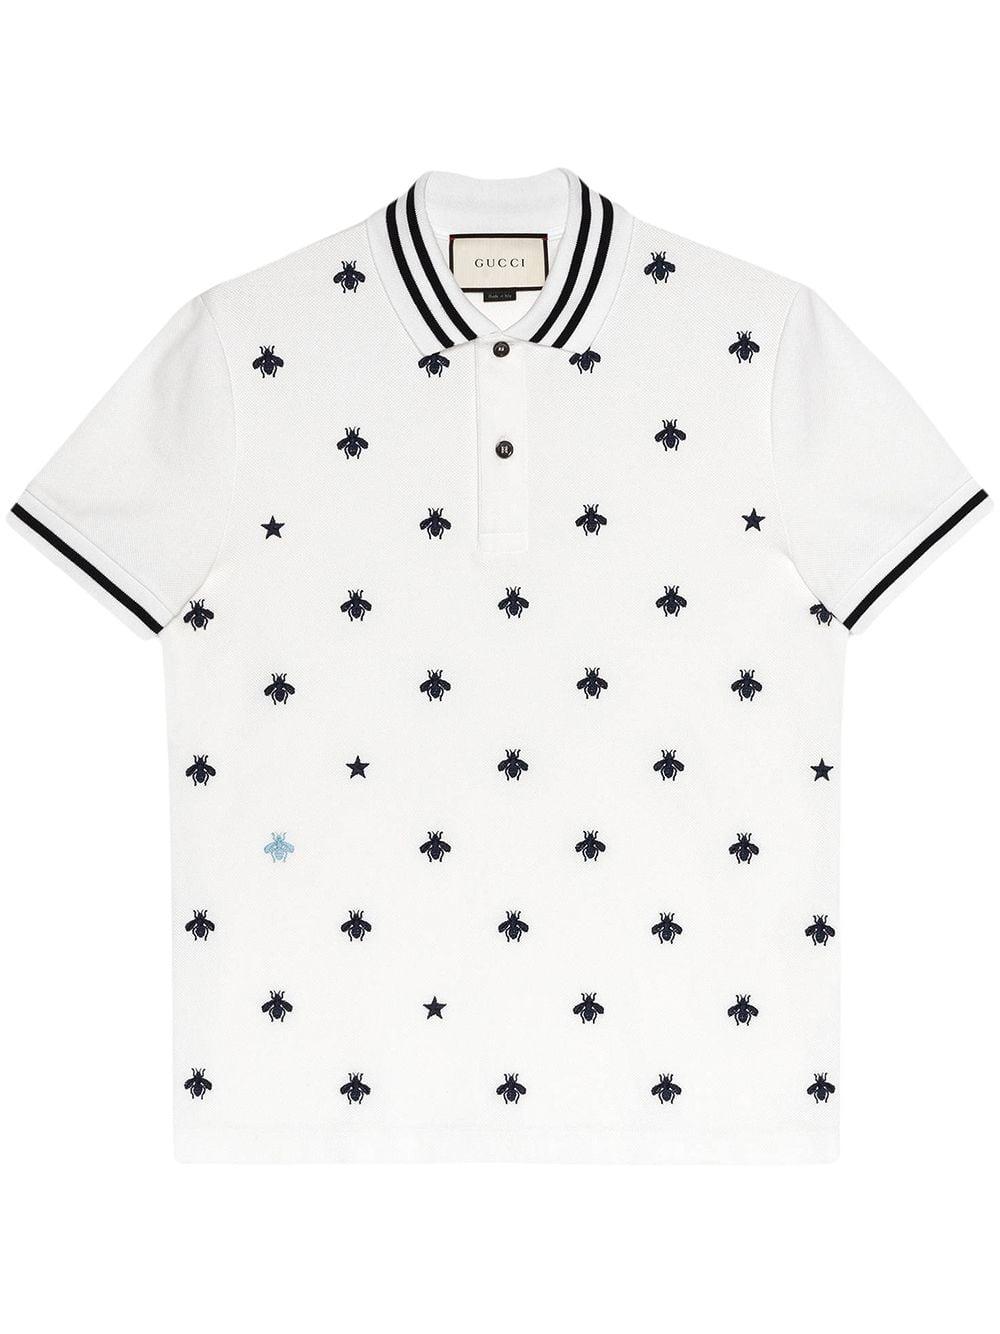 Gucci Polo With Bees And Stars in White for Men - Lyst